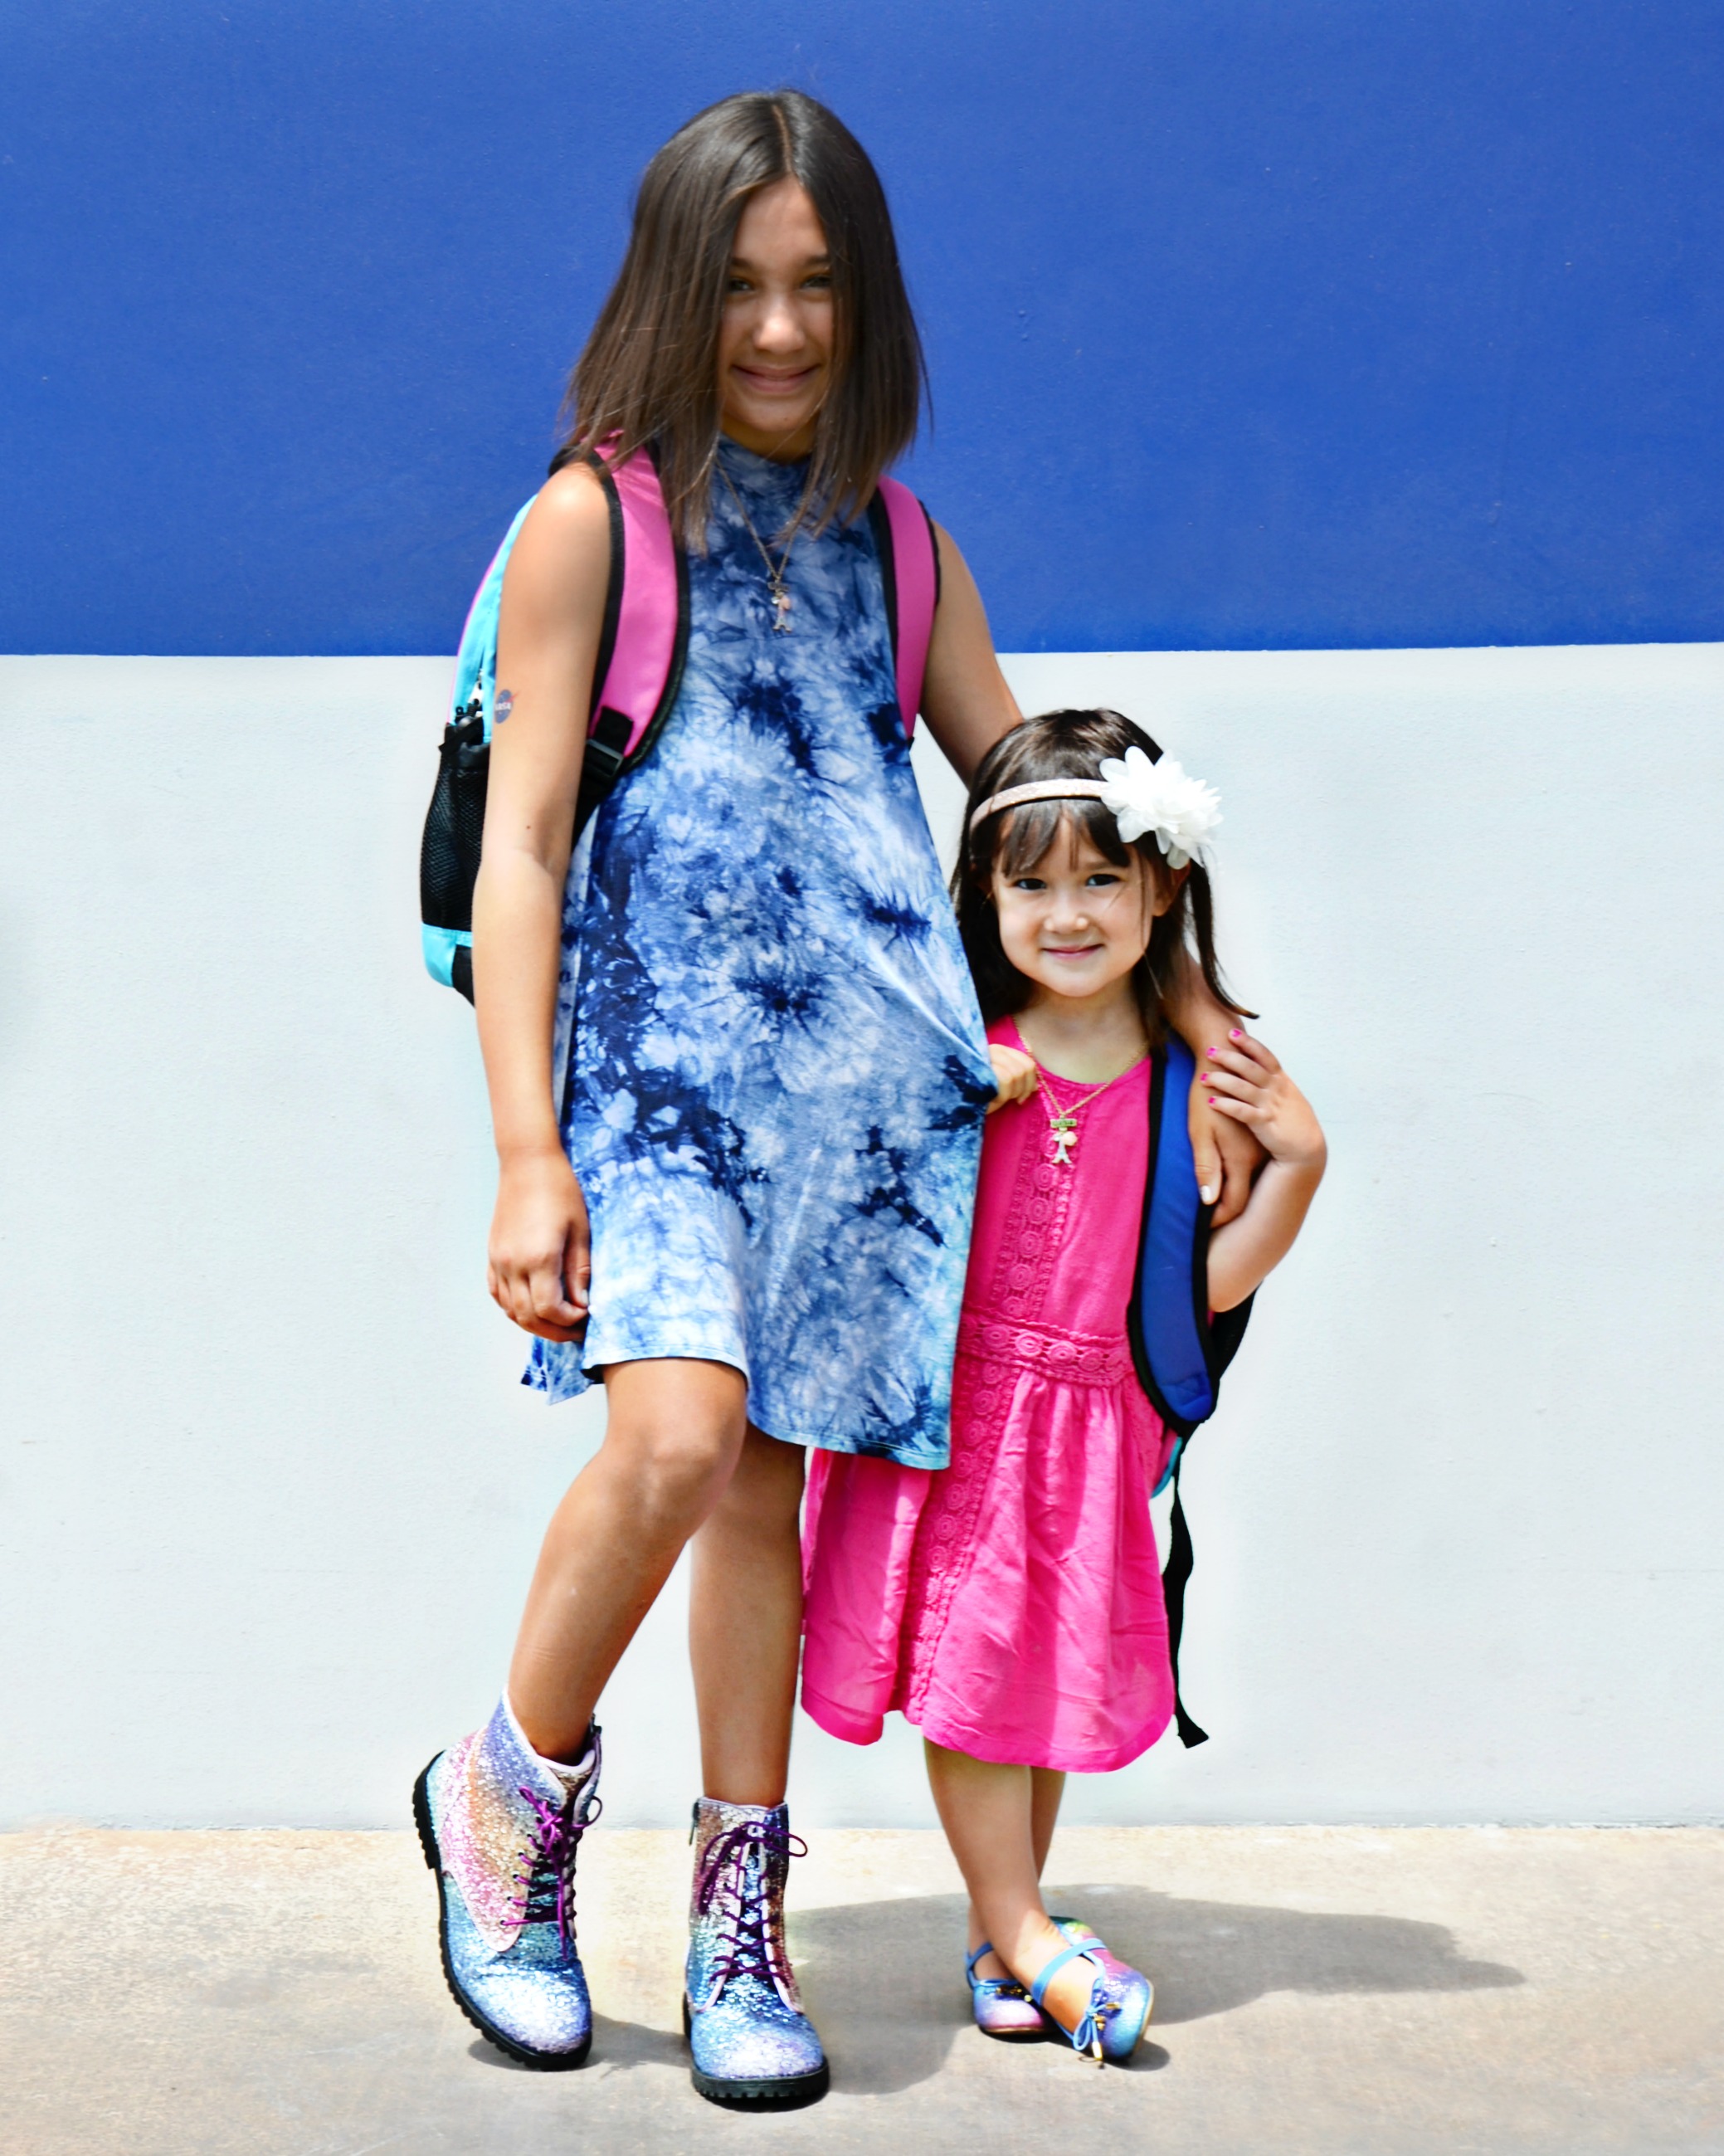 These sisters are ready to head back to school with matching rainbow glitter shoes from KidsShoes.